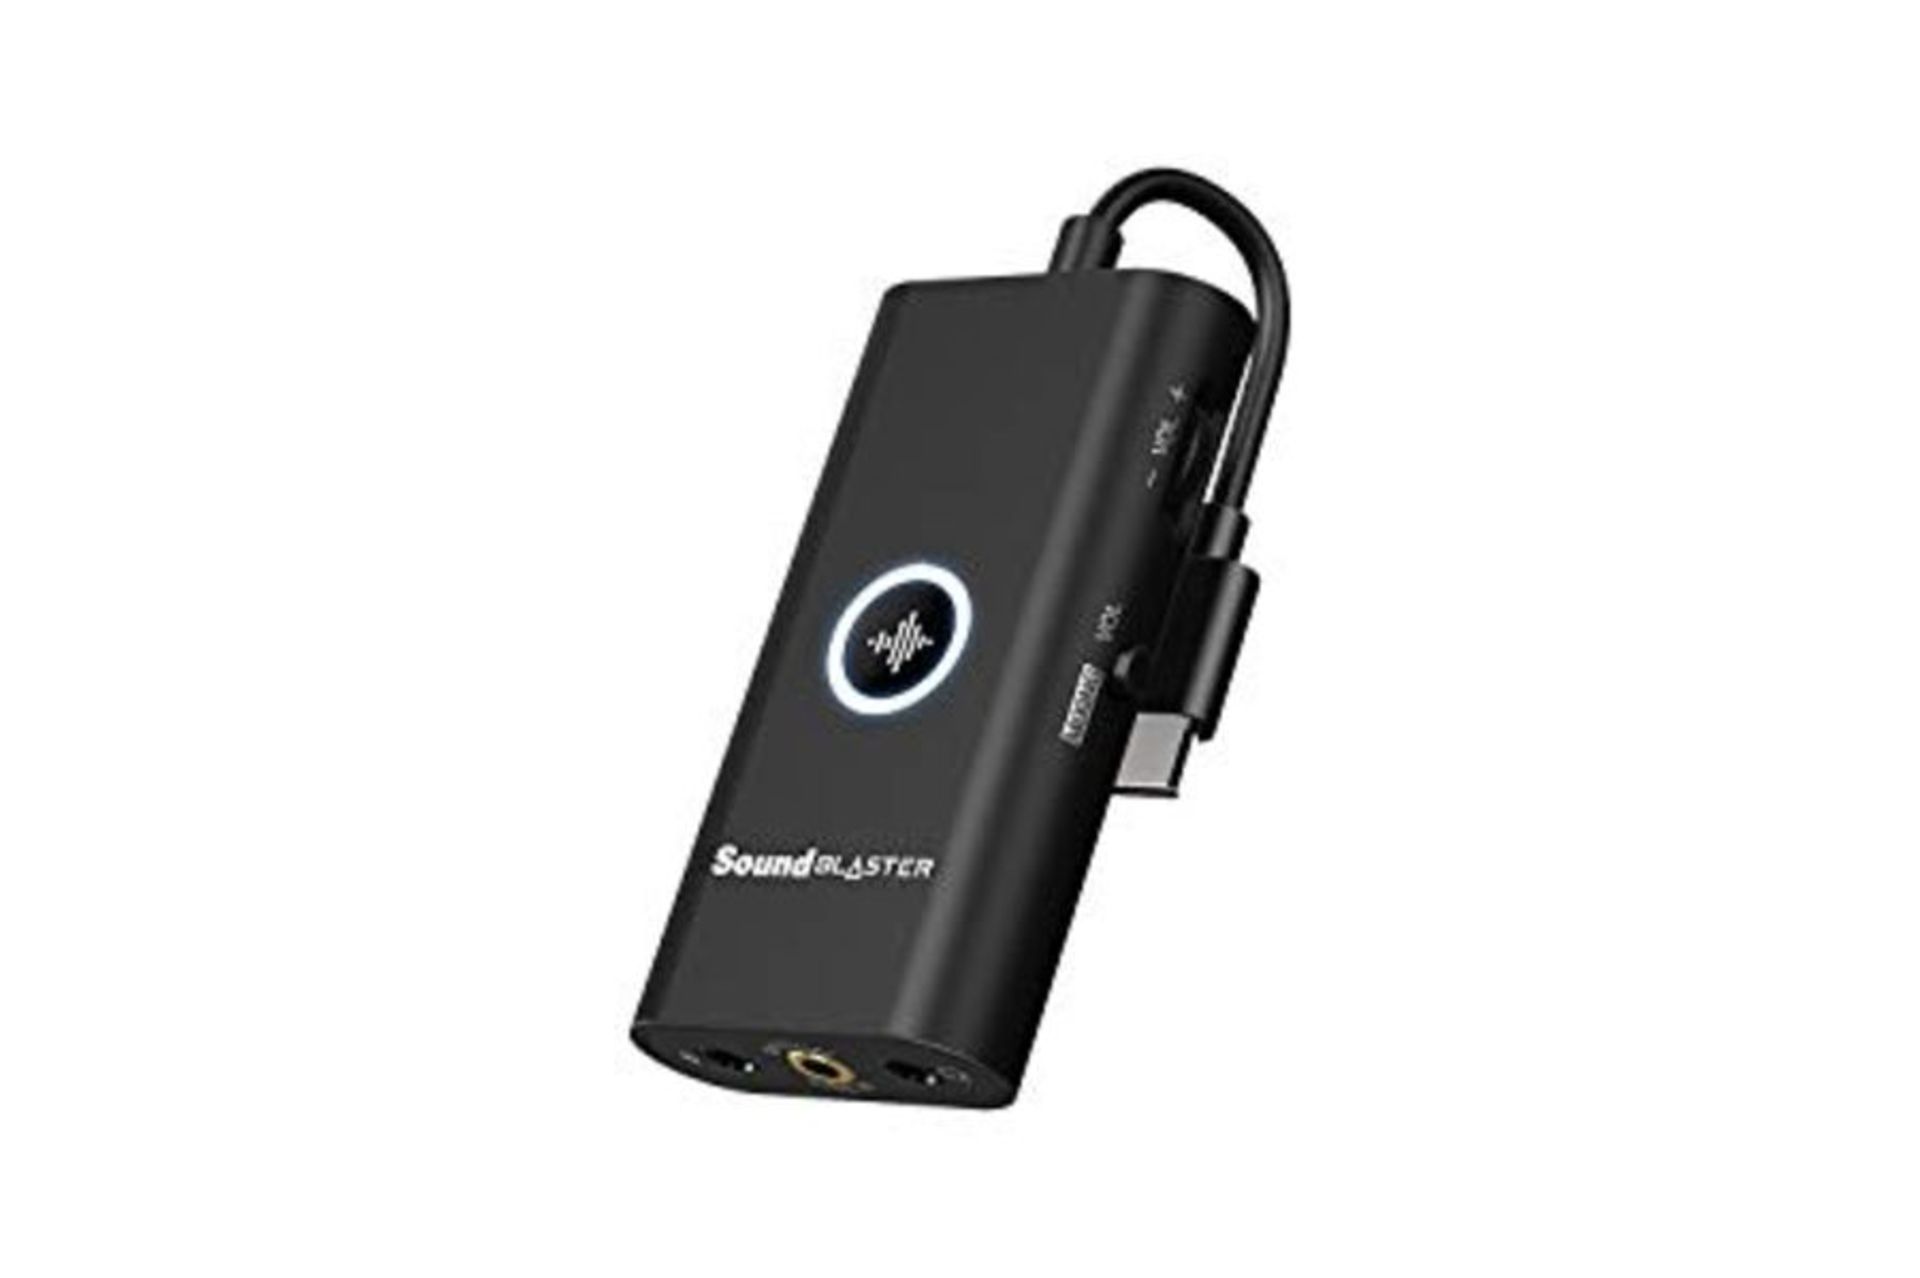 Creative Sound Blaster G3 USB-C DAC Amplifier for PS4 Gaming Consoles, Nintendo Switch